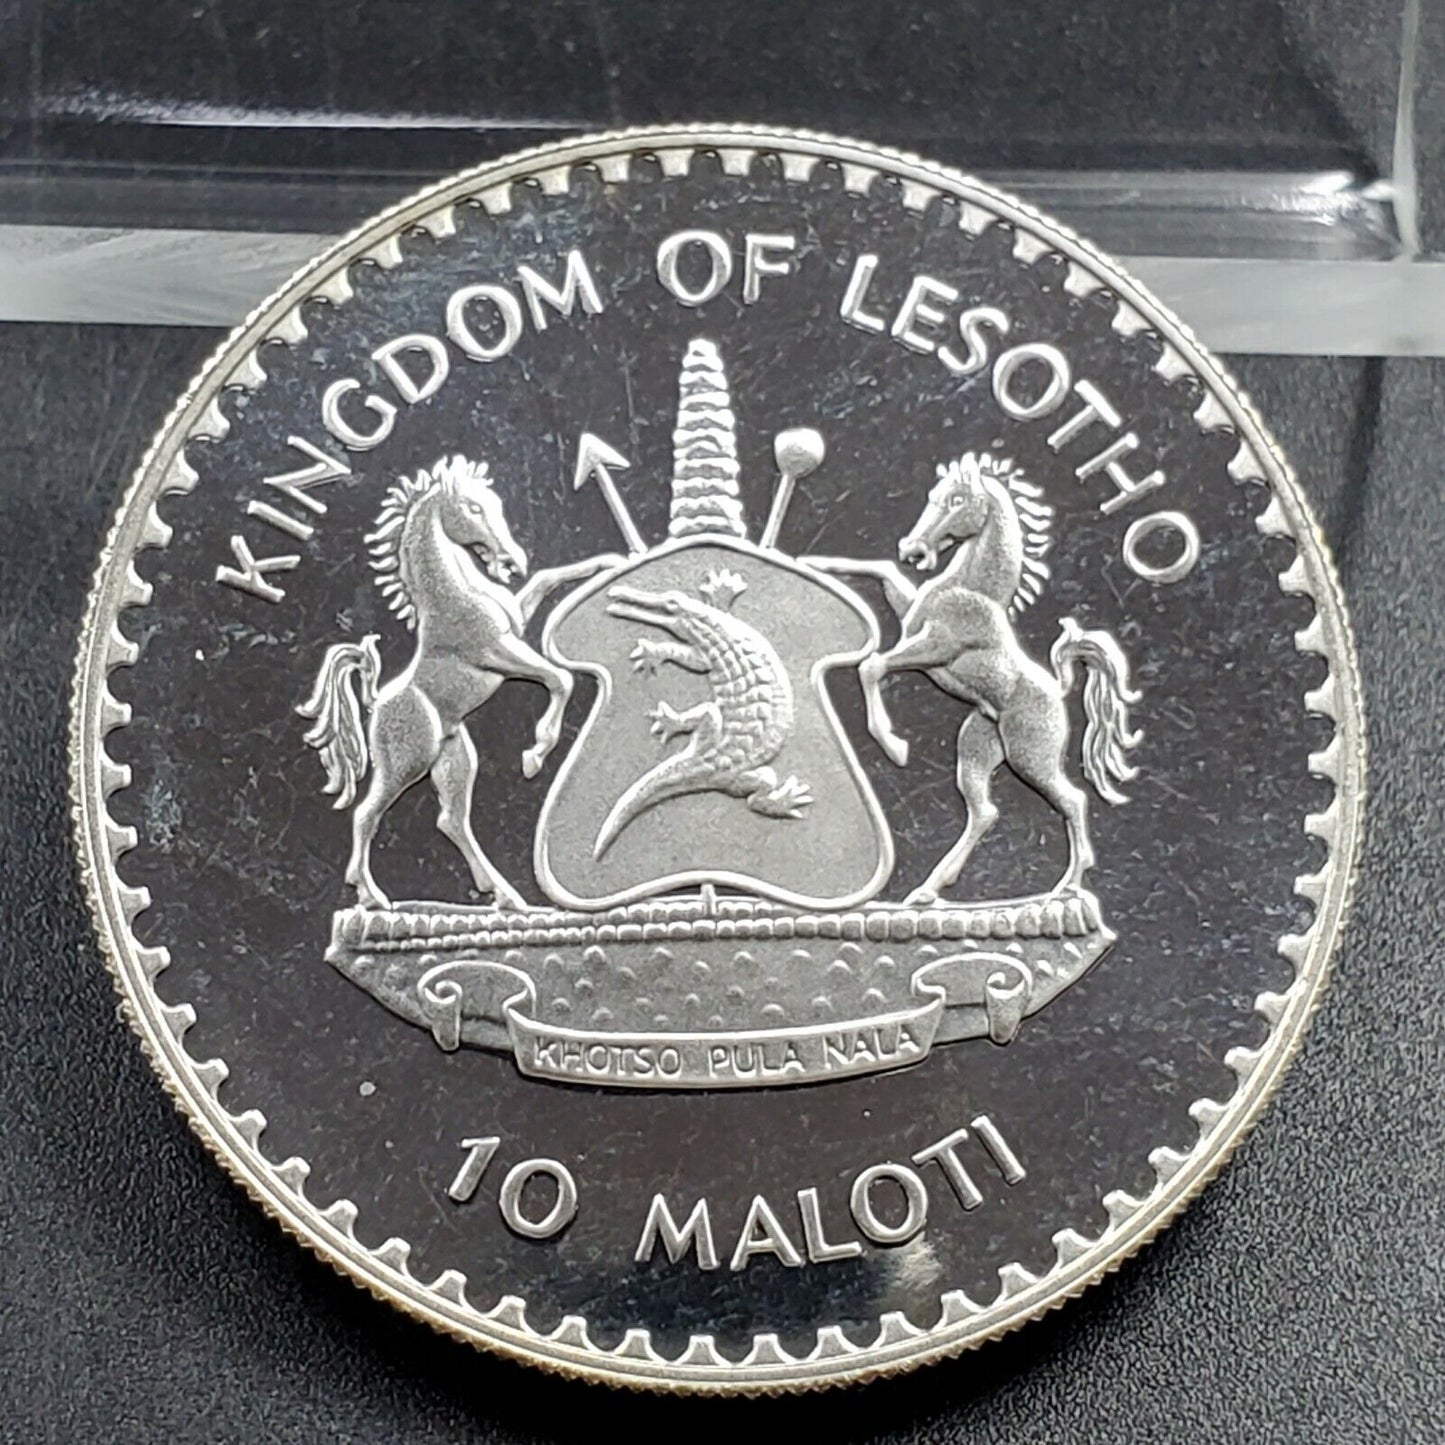 1982 Lesotho 10 Maloti  Proof Silver Coin